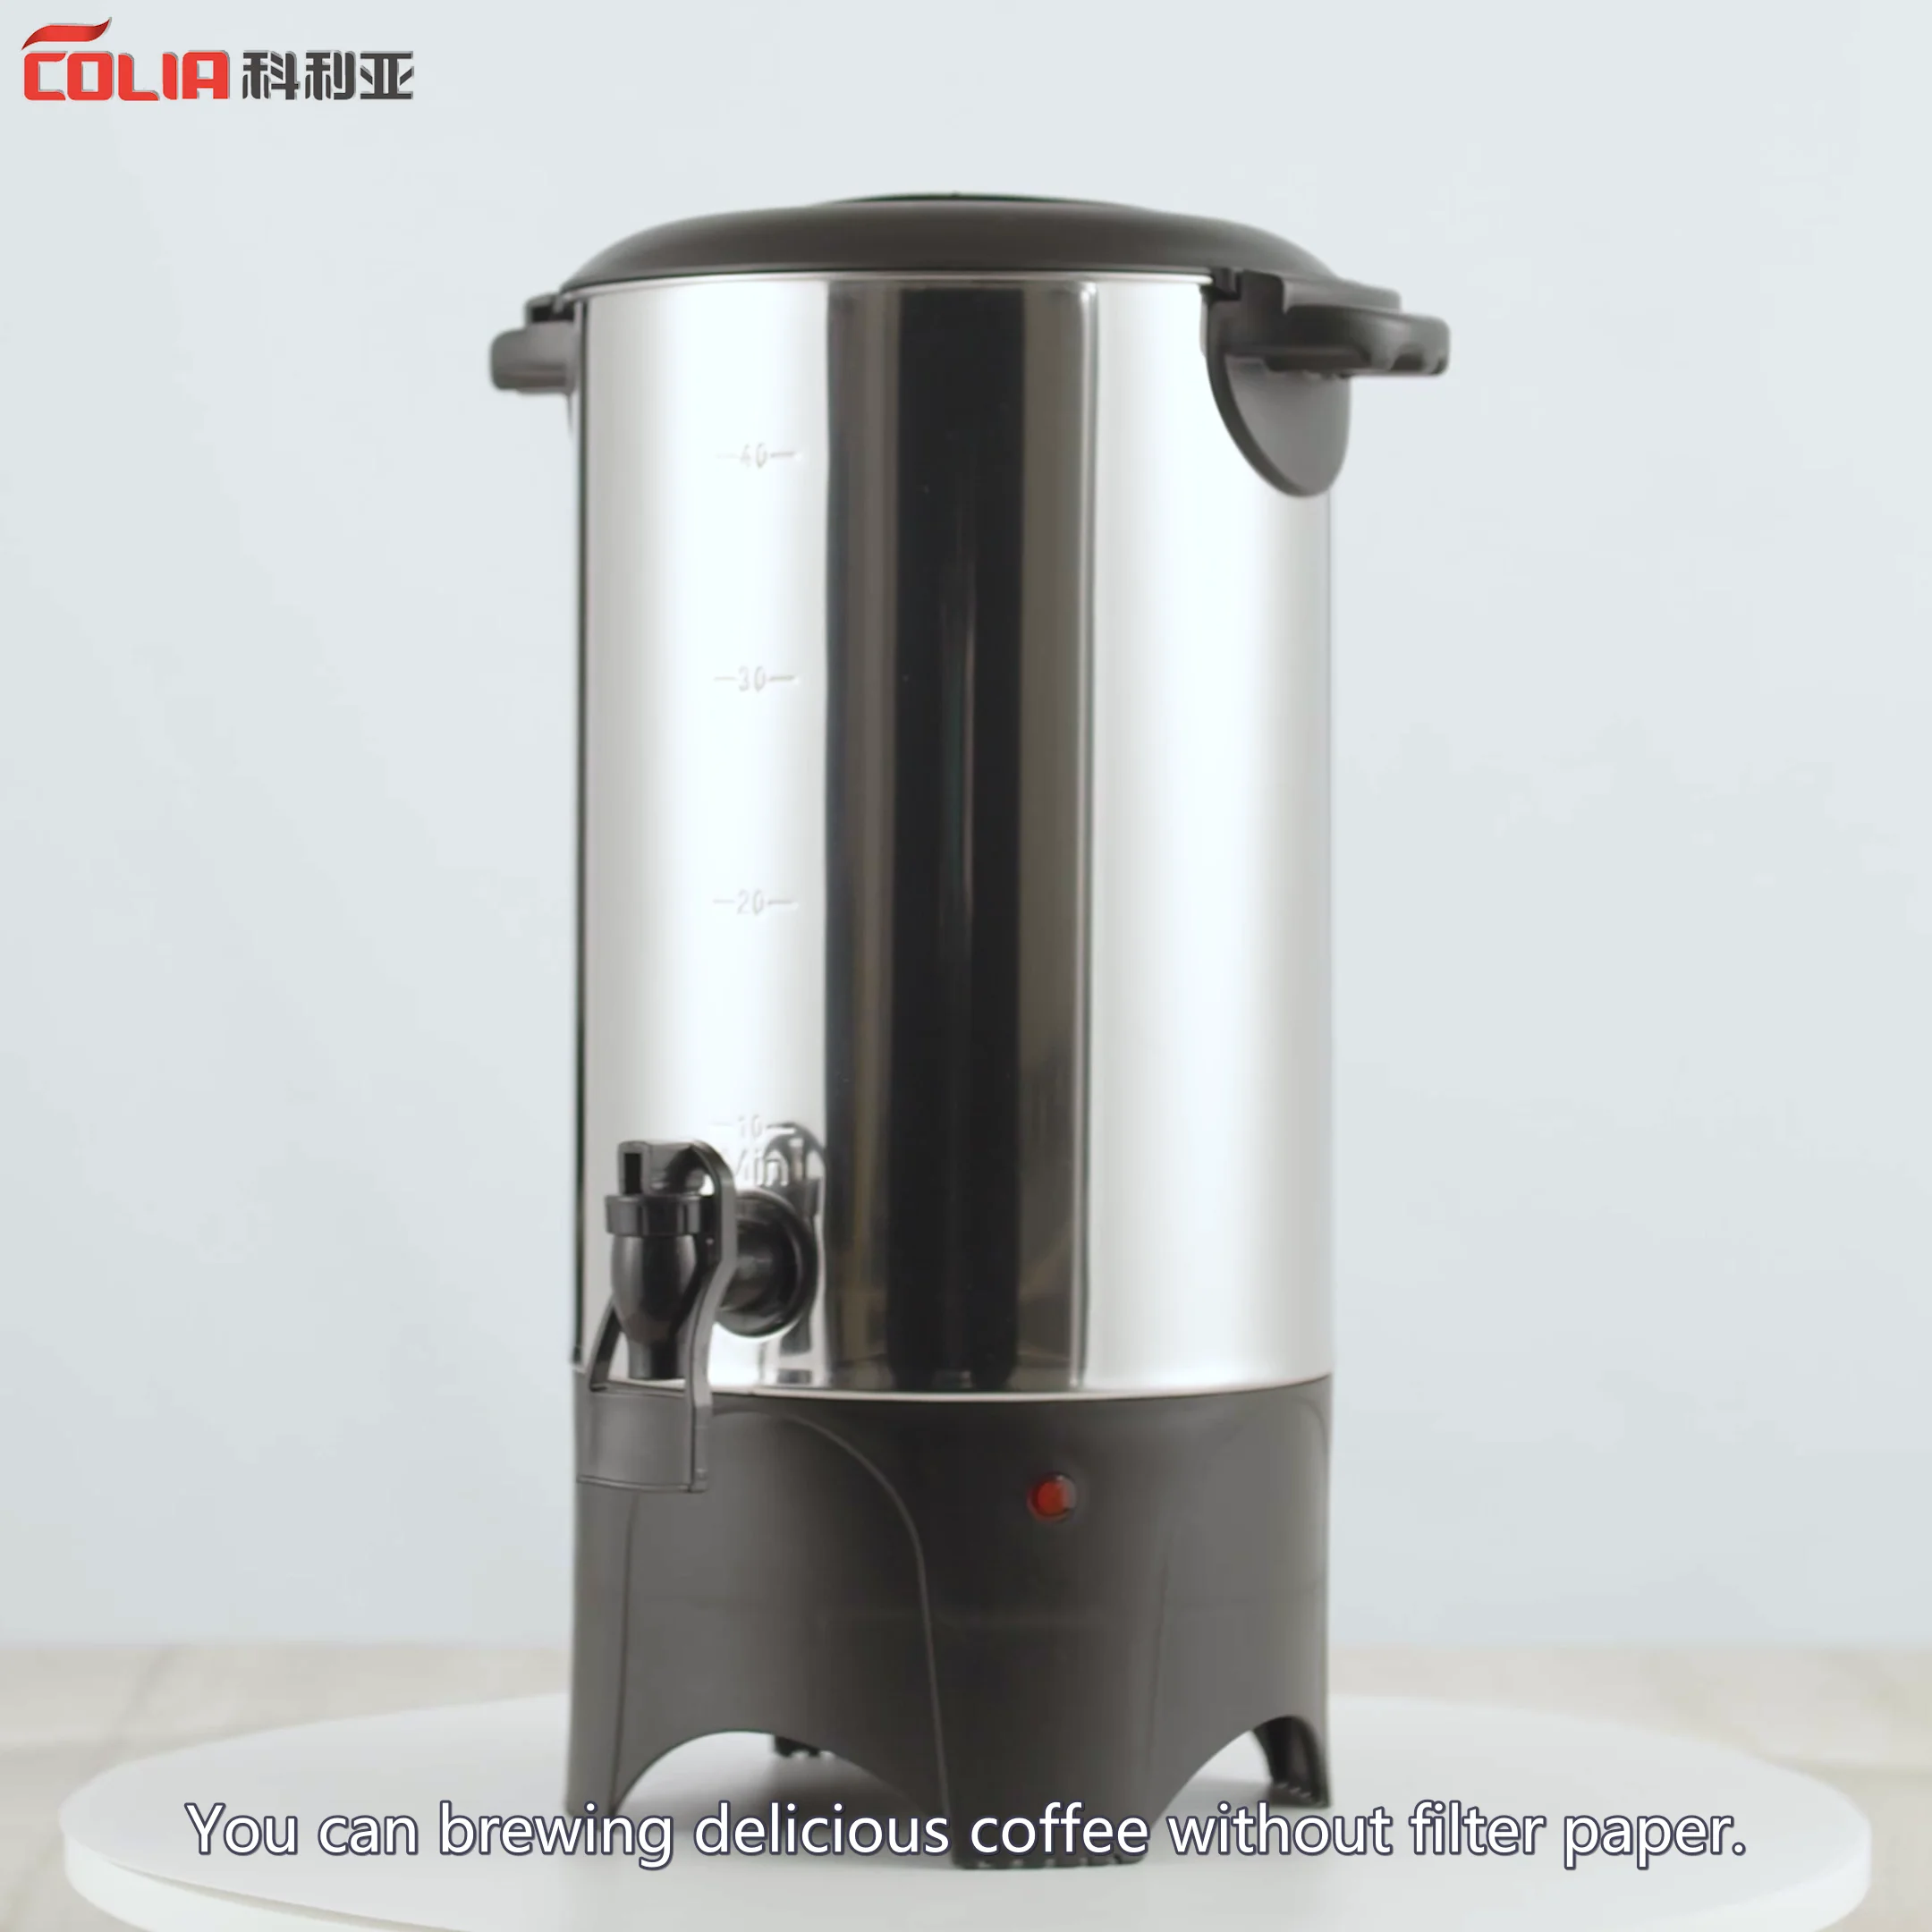 New 50 Cup Electric Coffee Maker Urn Machine Stainless Brewer Cafe